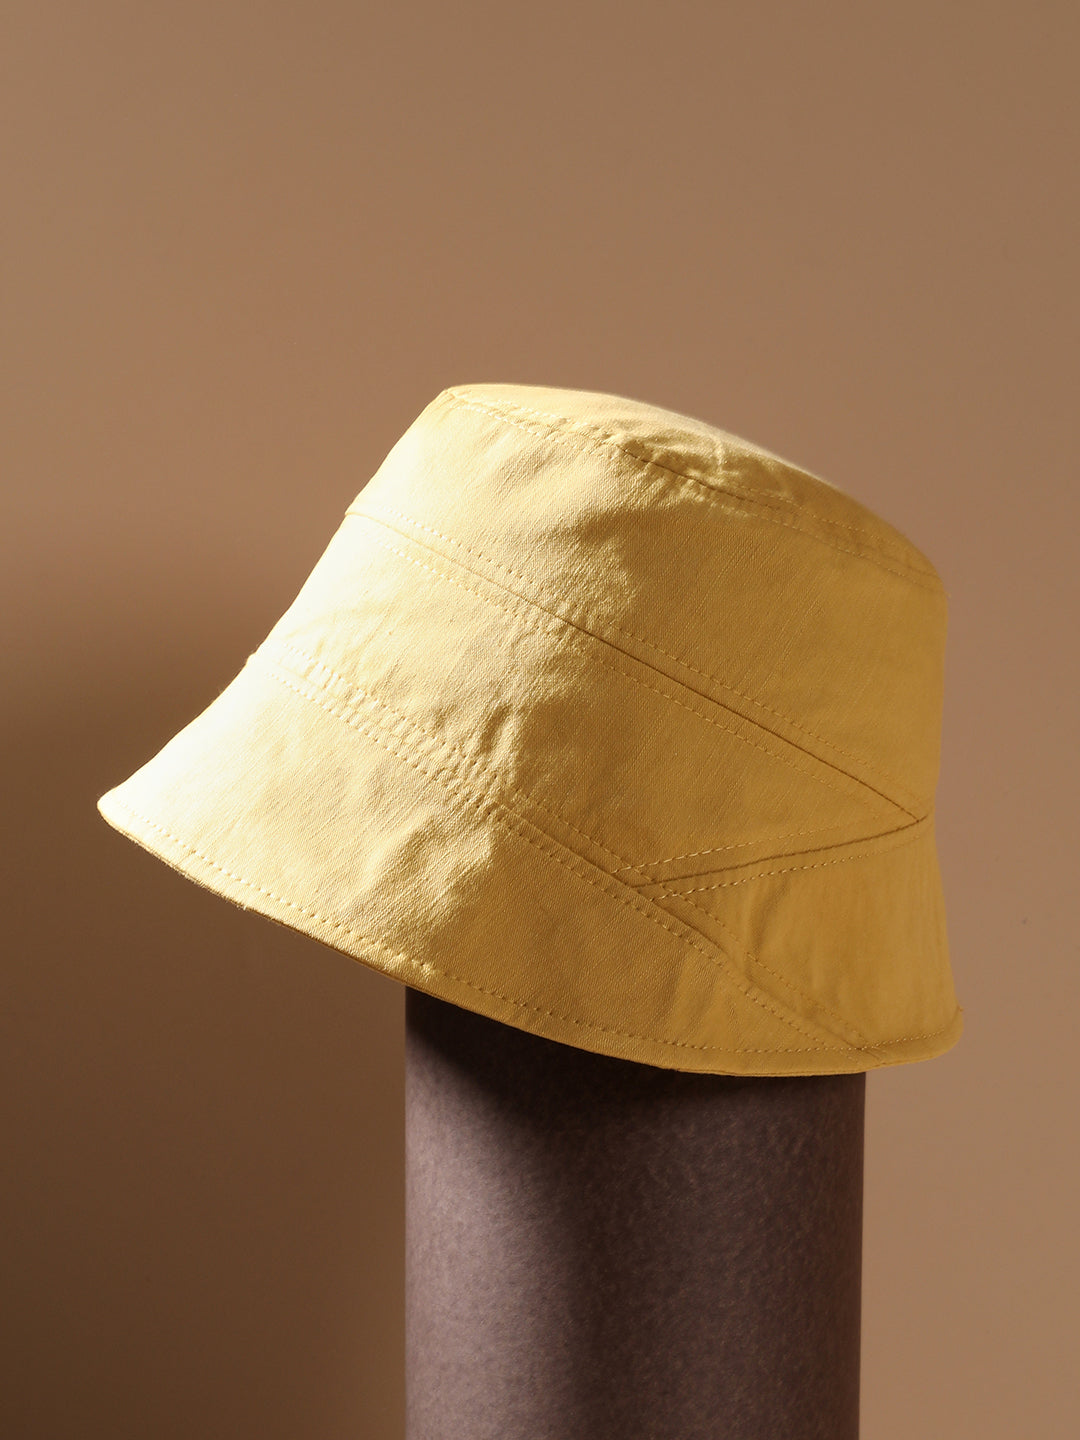 Self-Design Patched Bucket Hat - Mustard Yellow